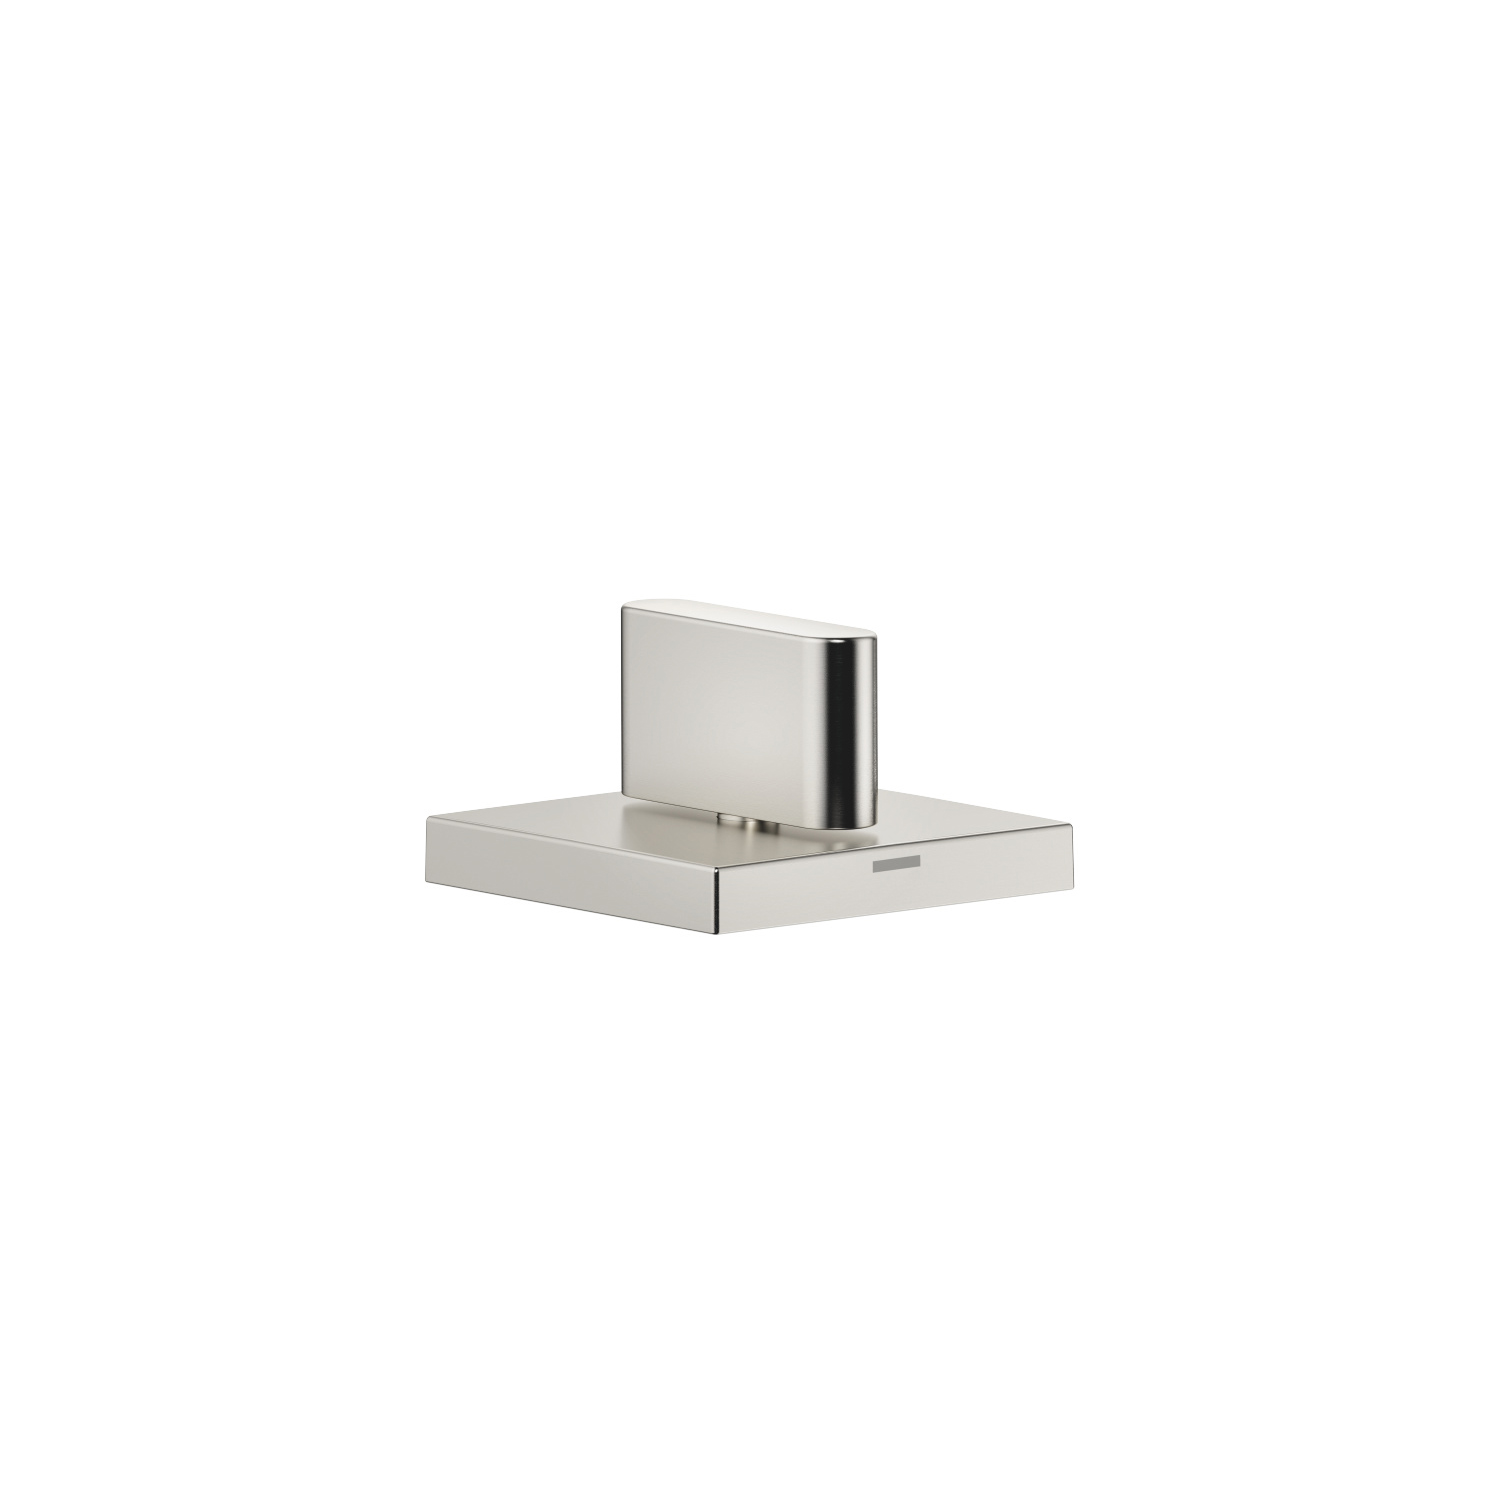 CL.1 Deck Mounted Thermostatic Valve-Hot In Platinum Matte